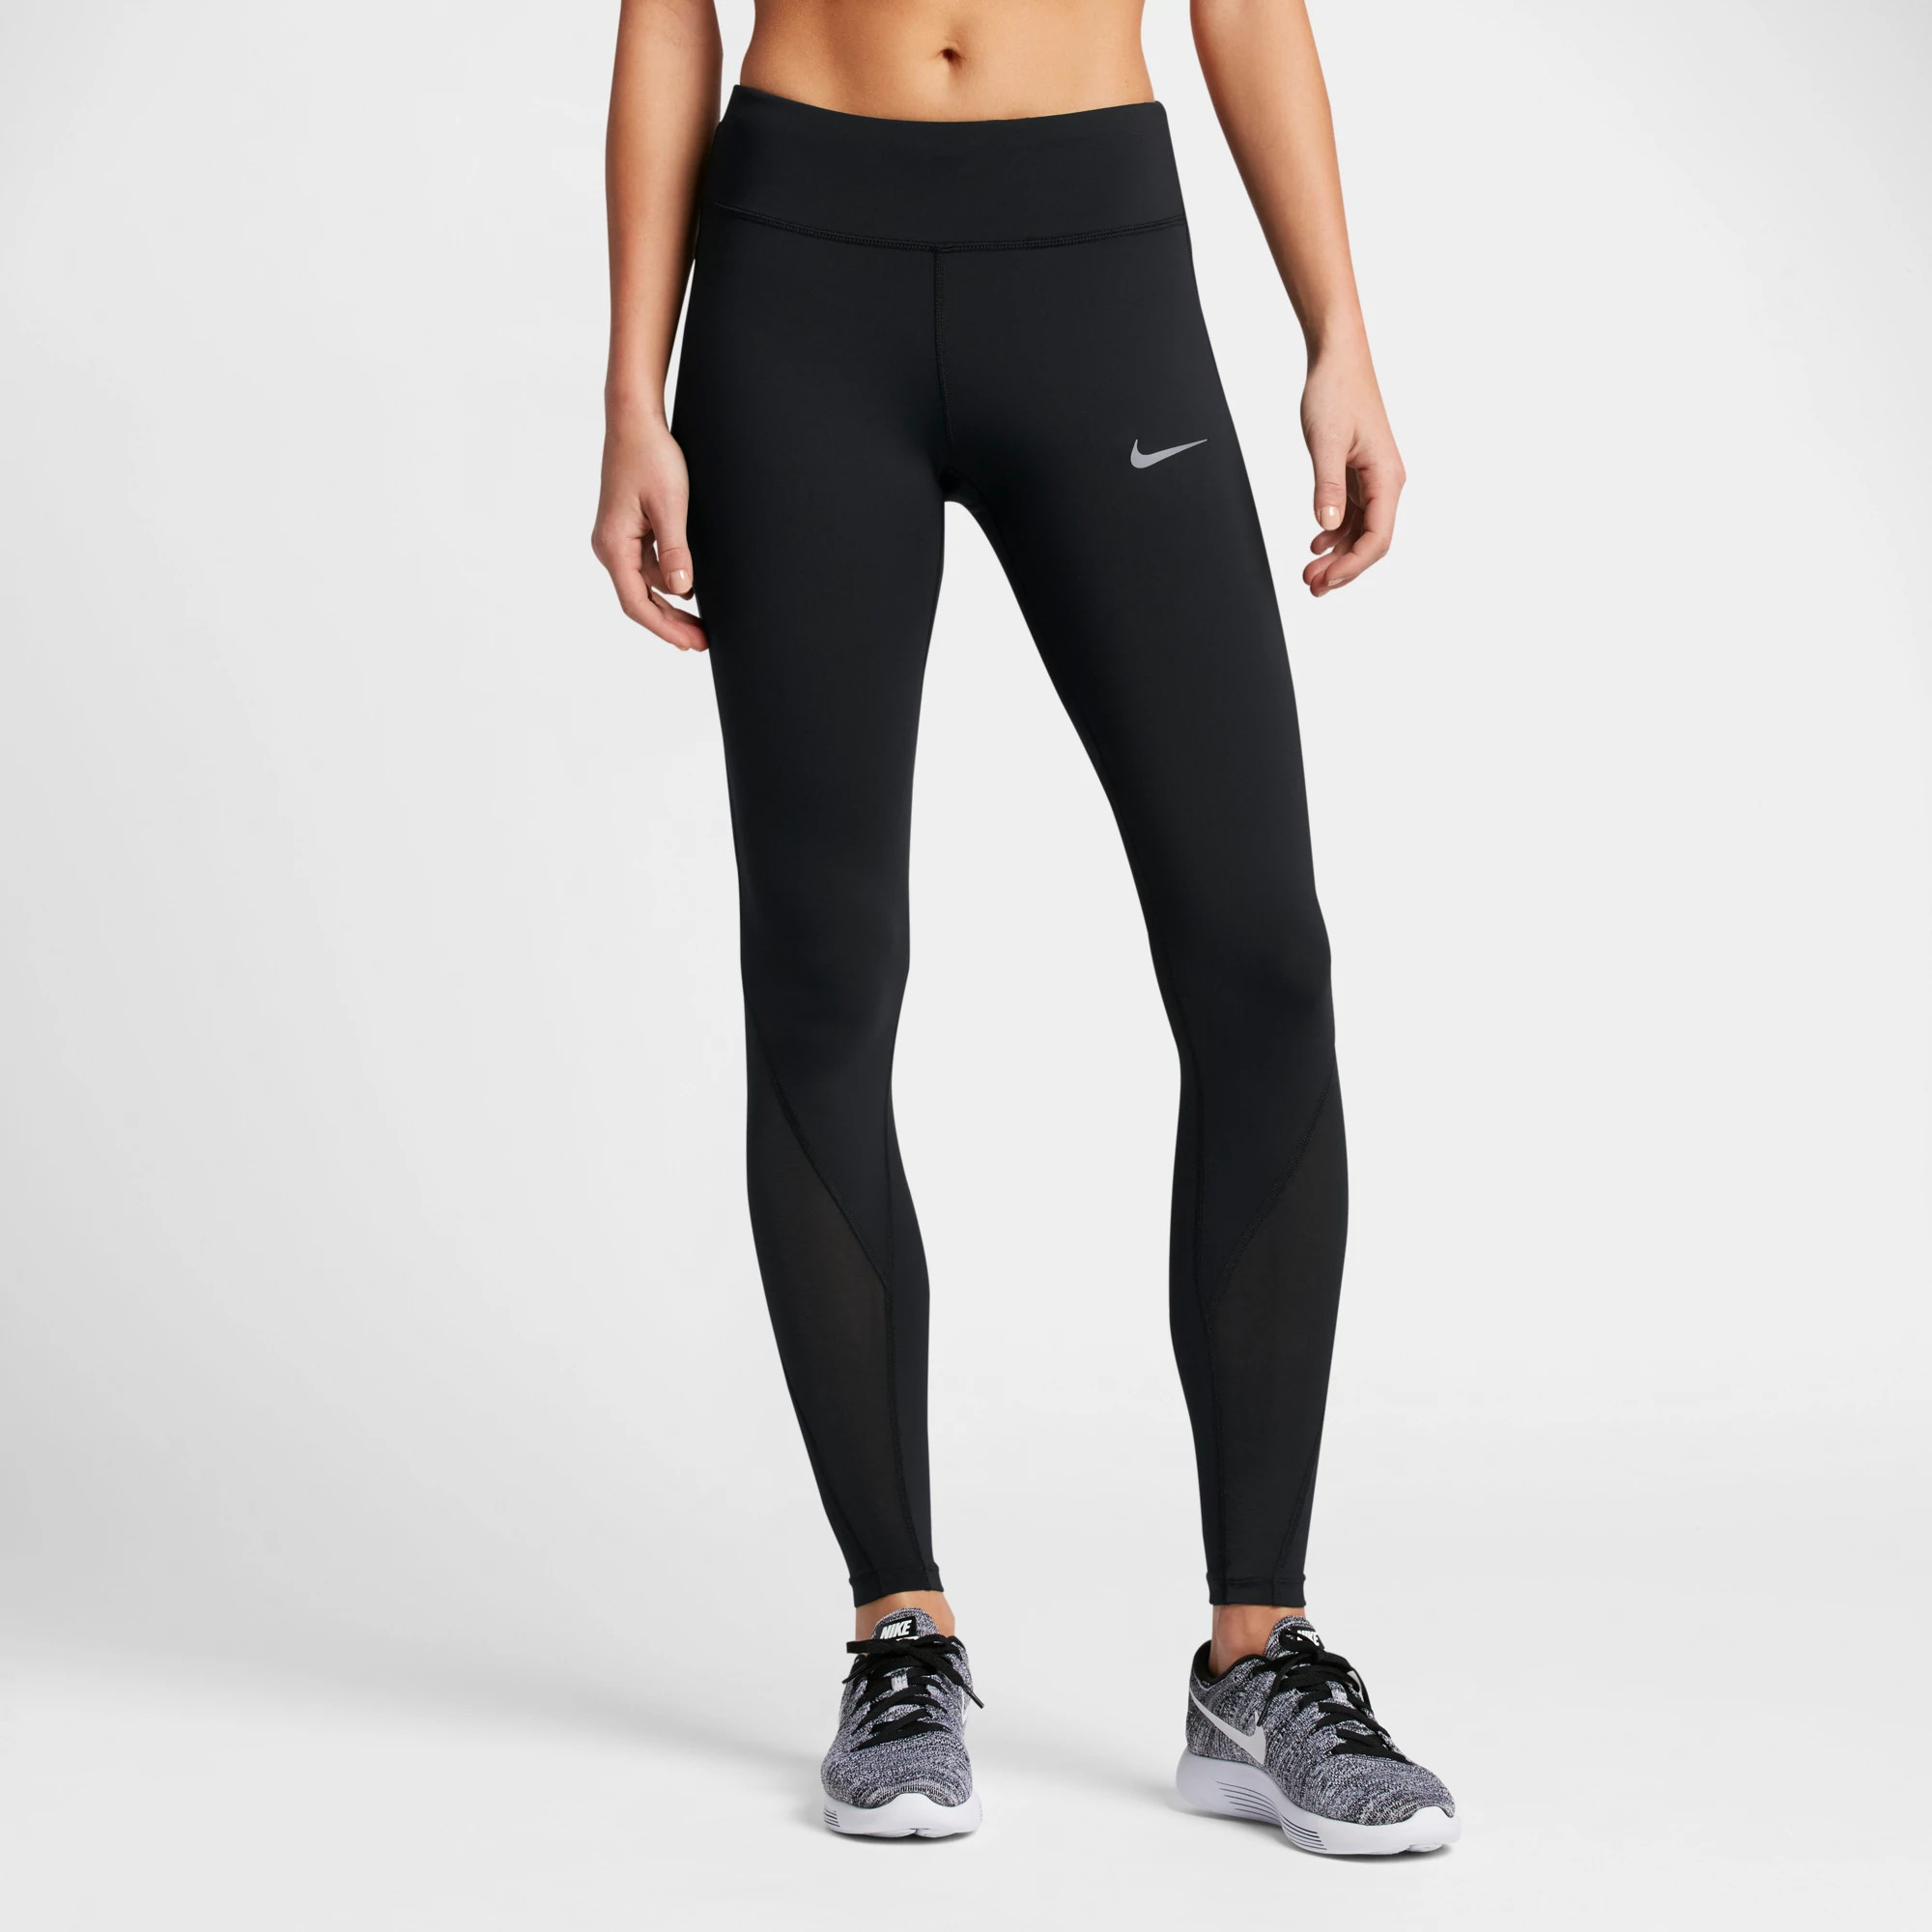 CV2253-010 New with tag Women Nike Epic Lux Power Flash Running Tight Pant  $140